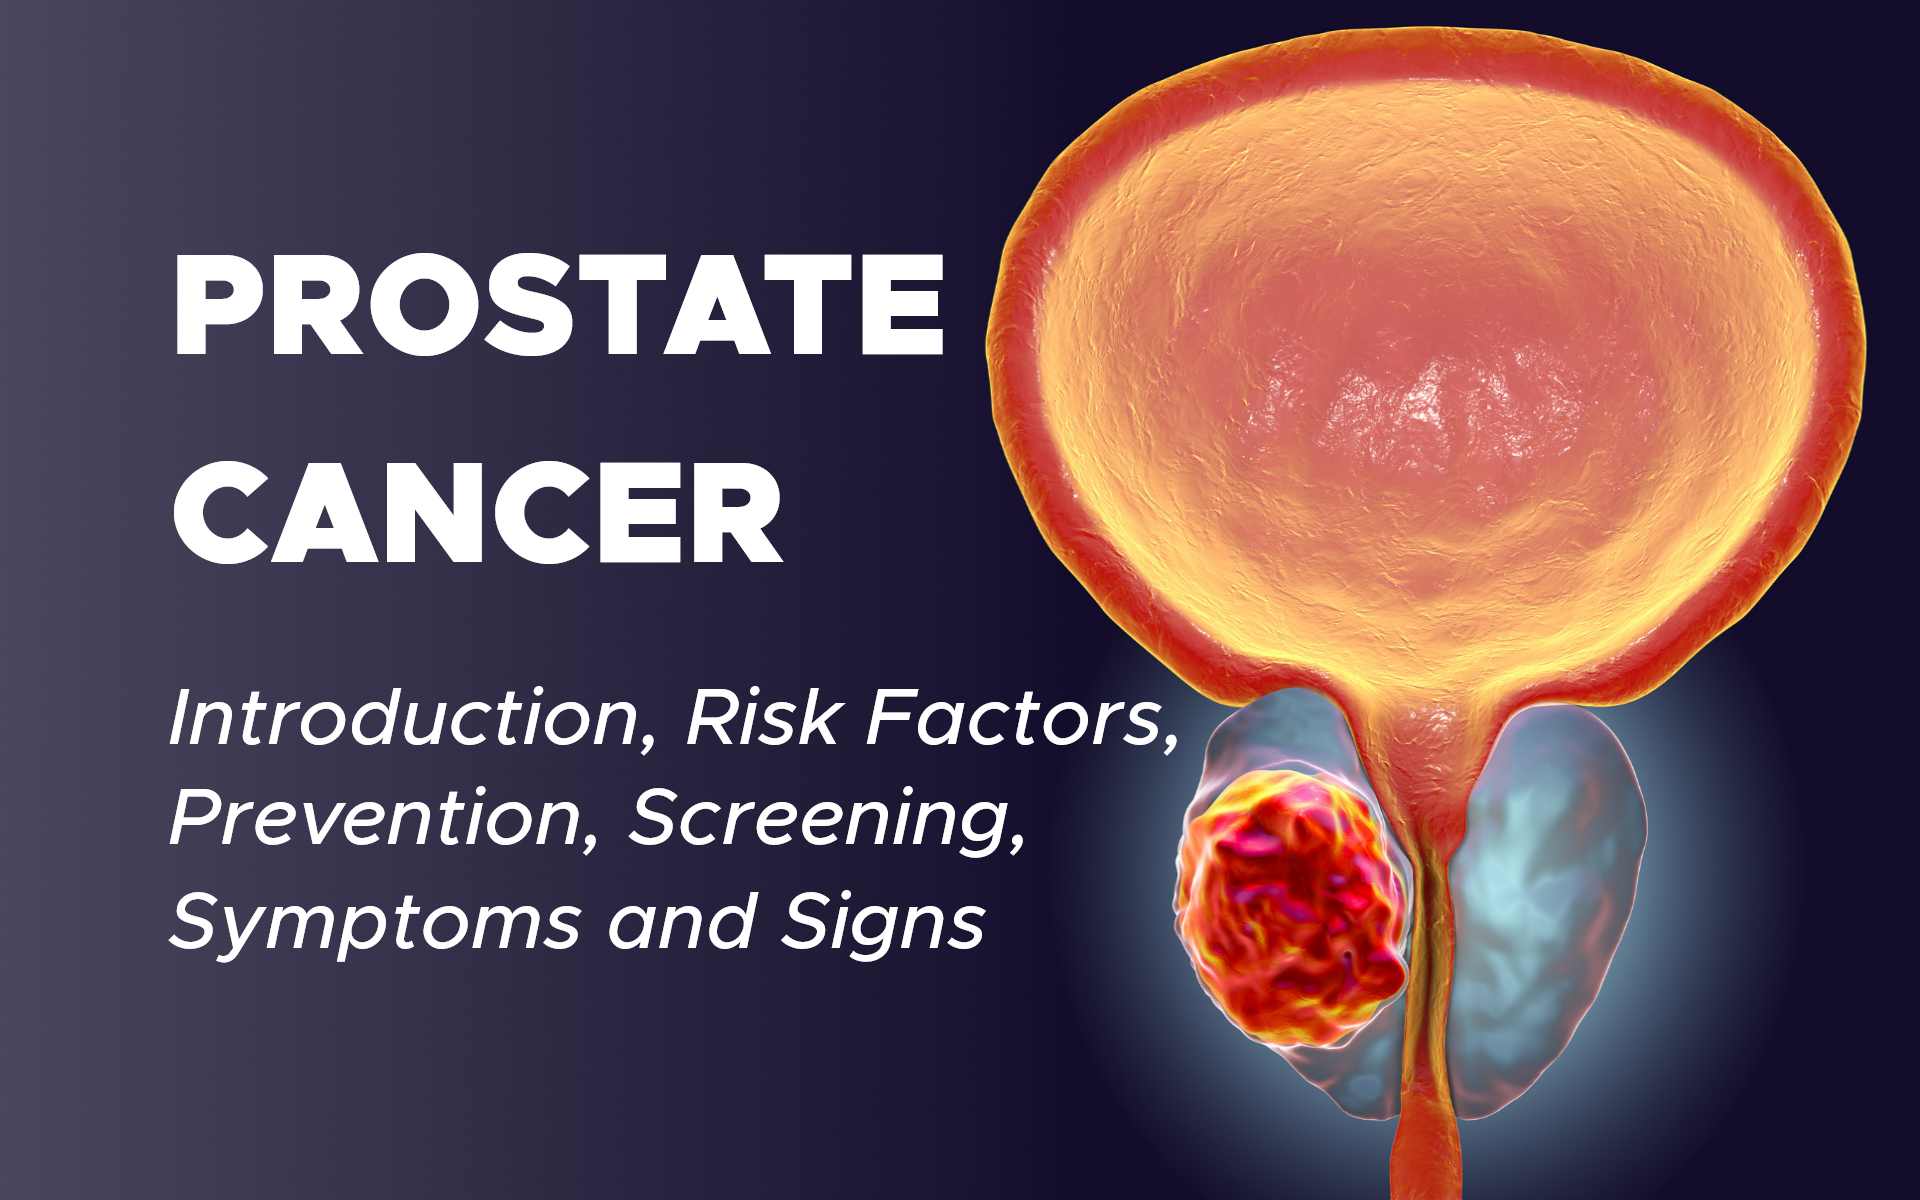 Prostate Cancer: Introduction, Risk Factors, Prevention, Screening, Symptoms and Signs